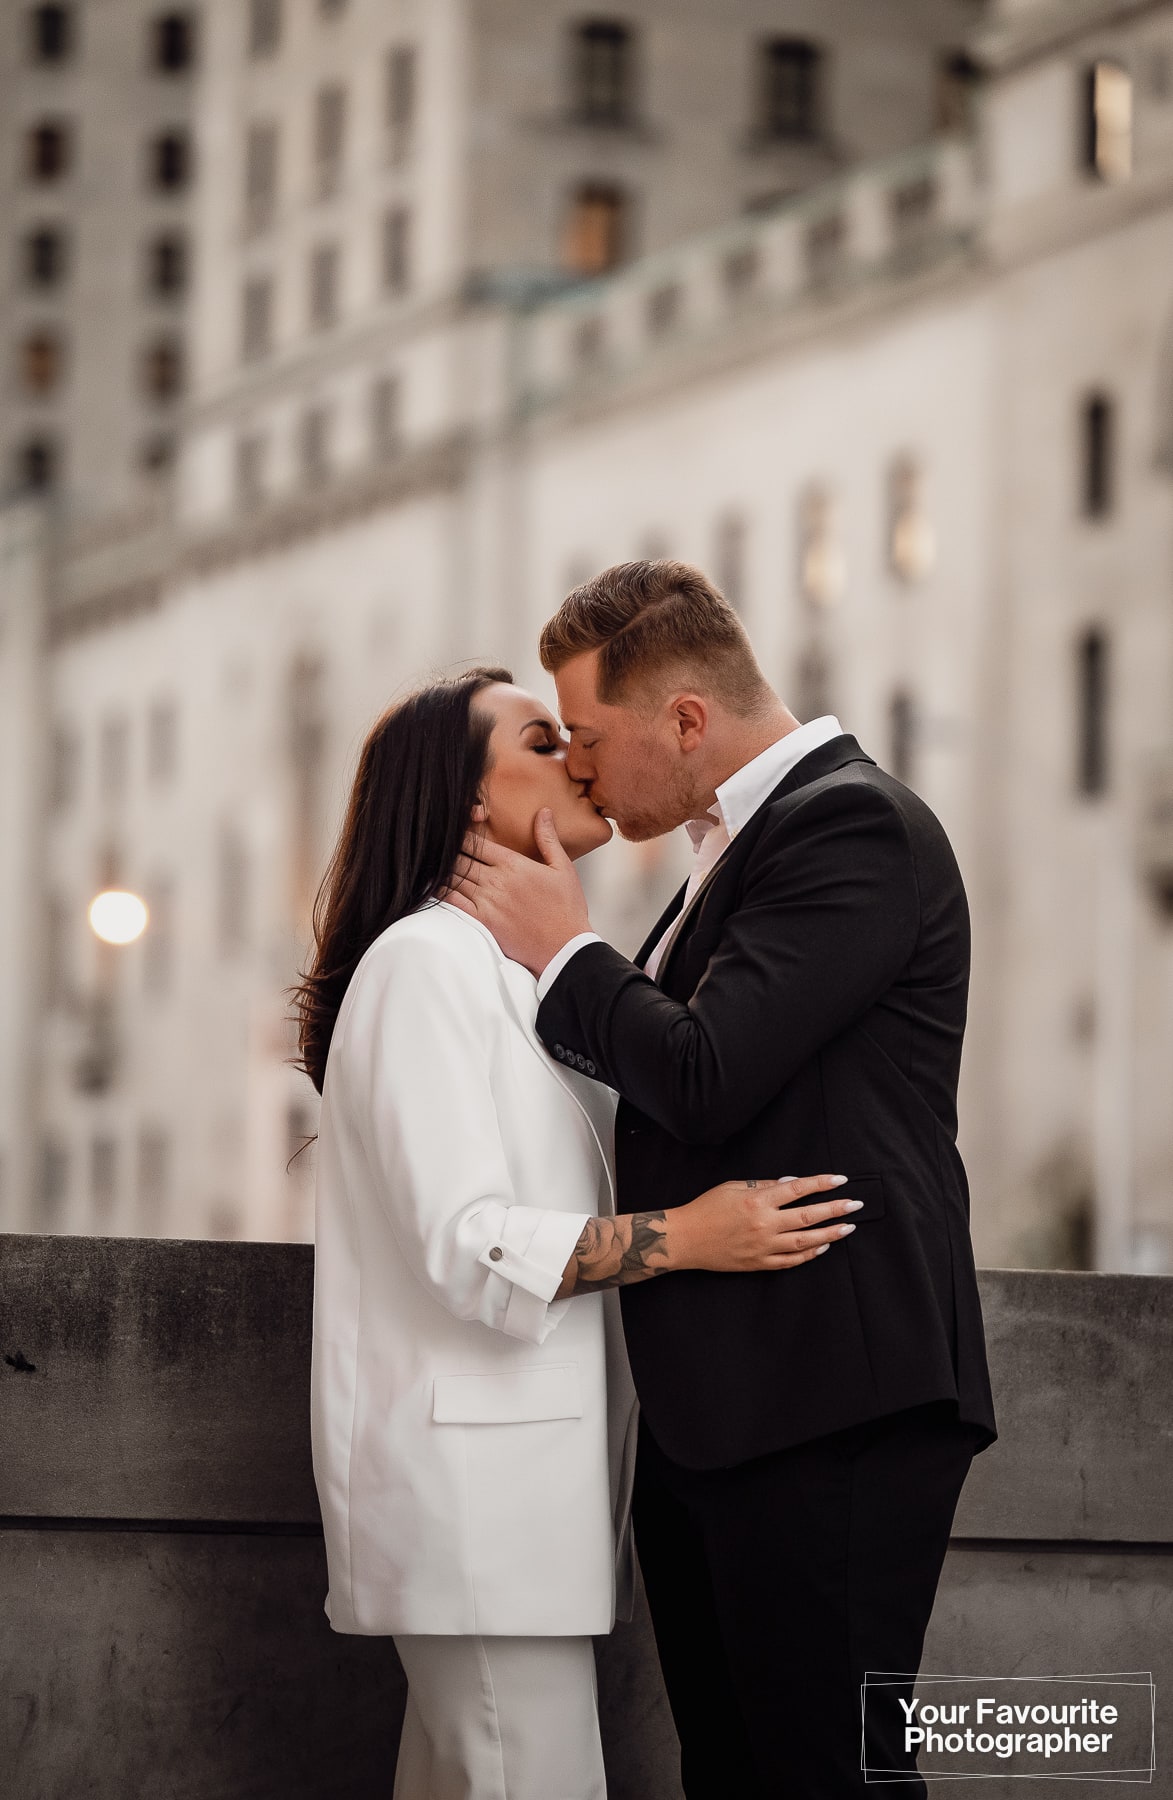 Rob and Sam's engagement photo shoot on the streets of downtown Toronto near Union Station